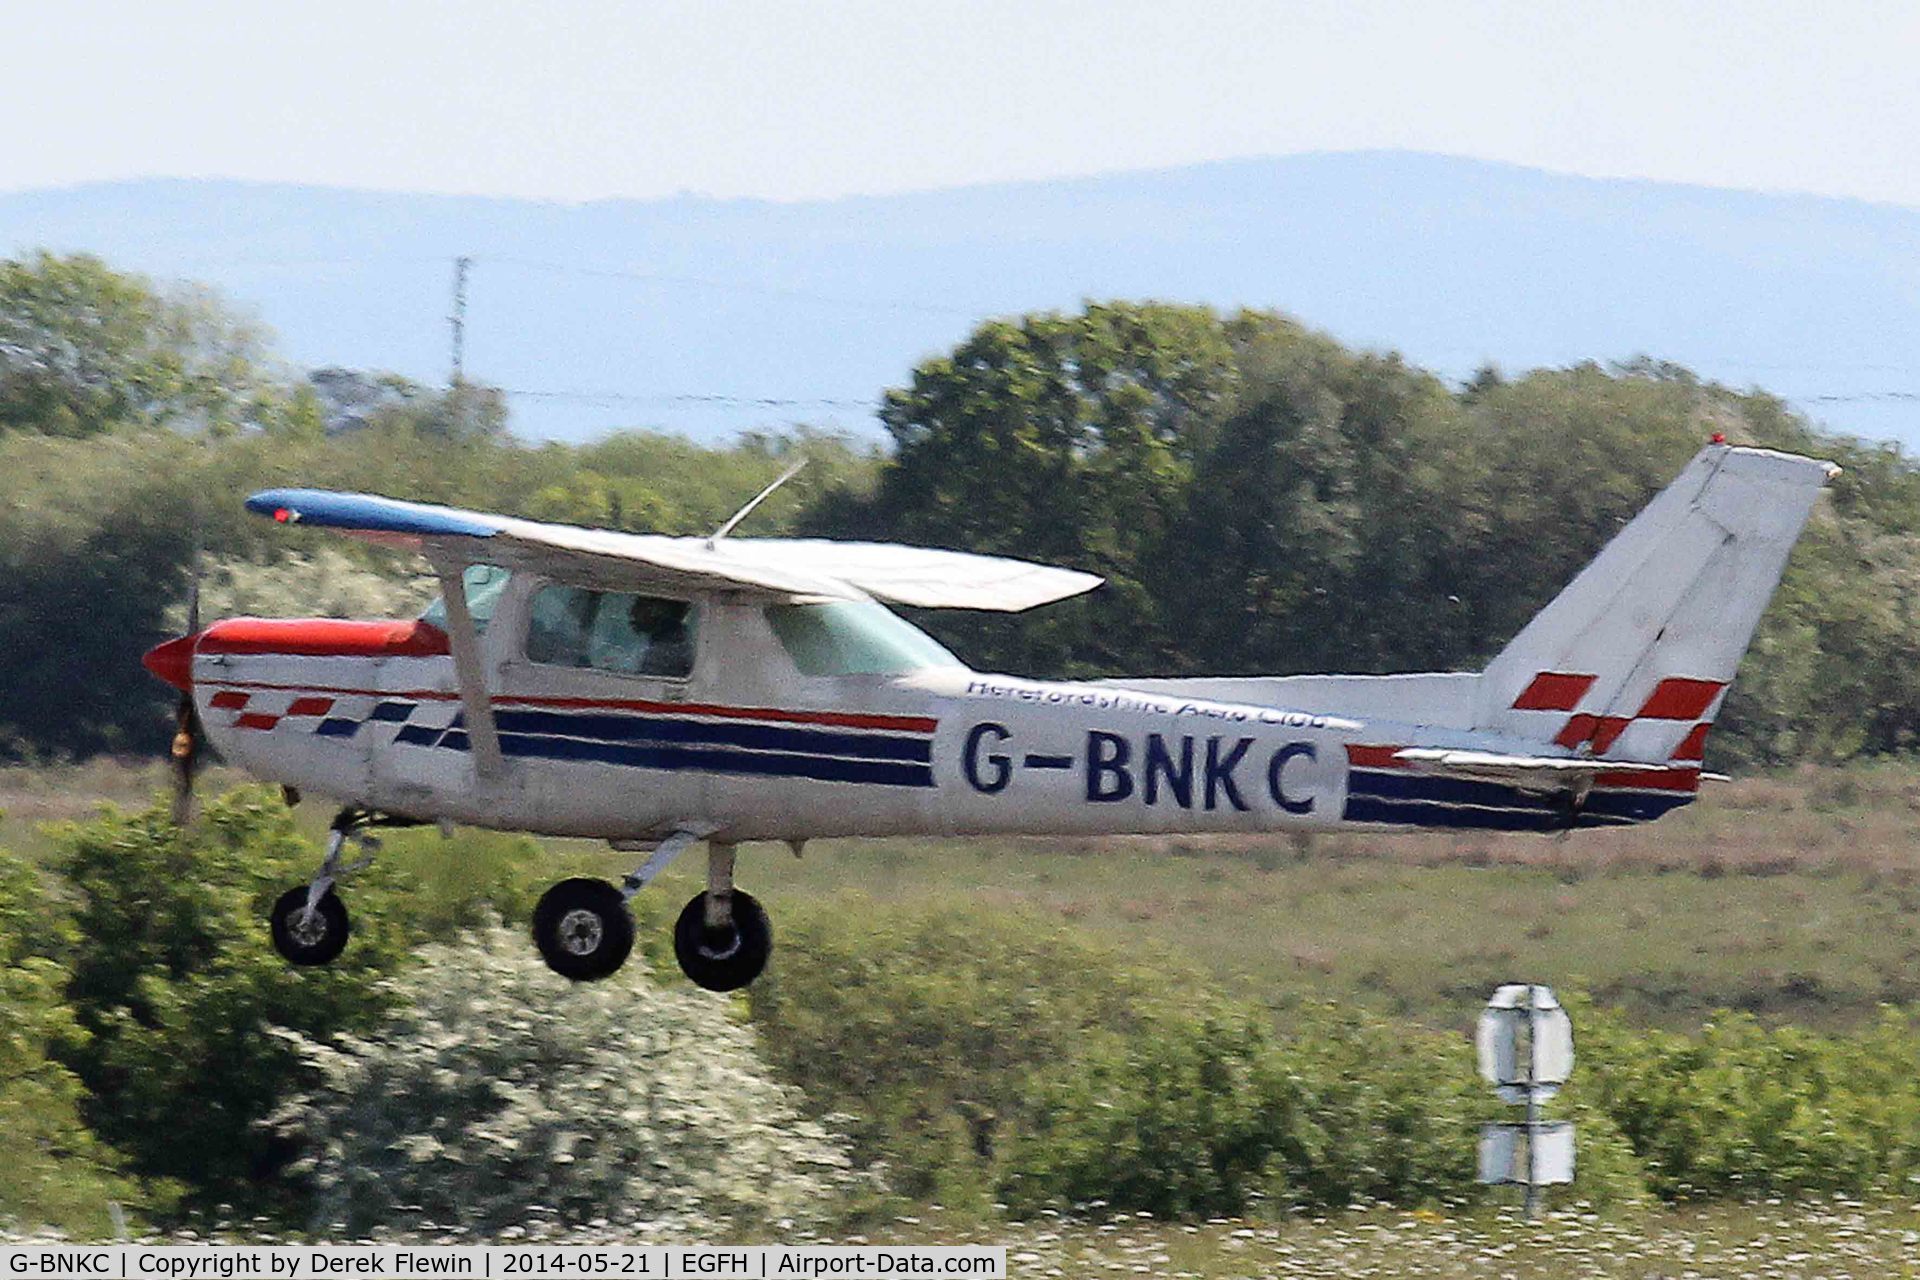 G-BNKC, 1978 Cessna 152 C/N 152-81036, Visiting Cessna 152 from the Herefordshire Areo Club, seen at EGFH.